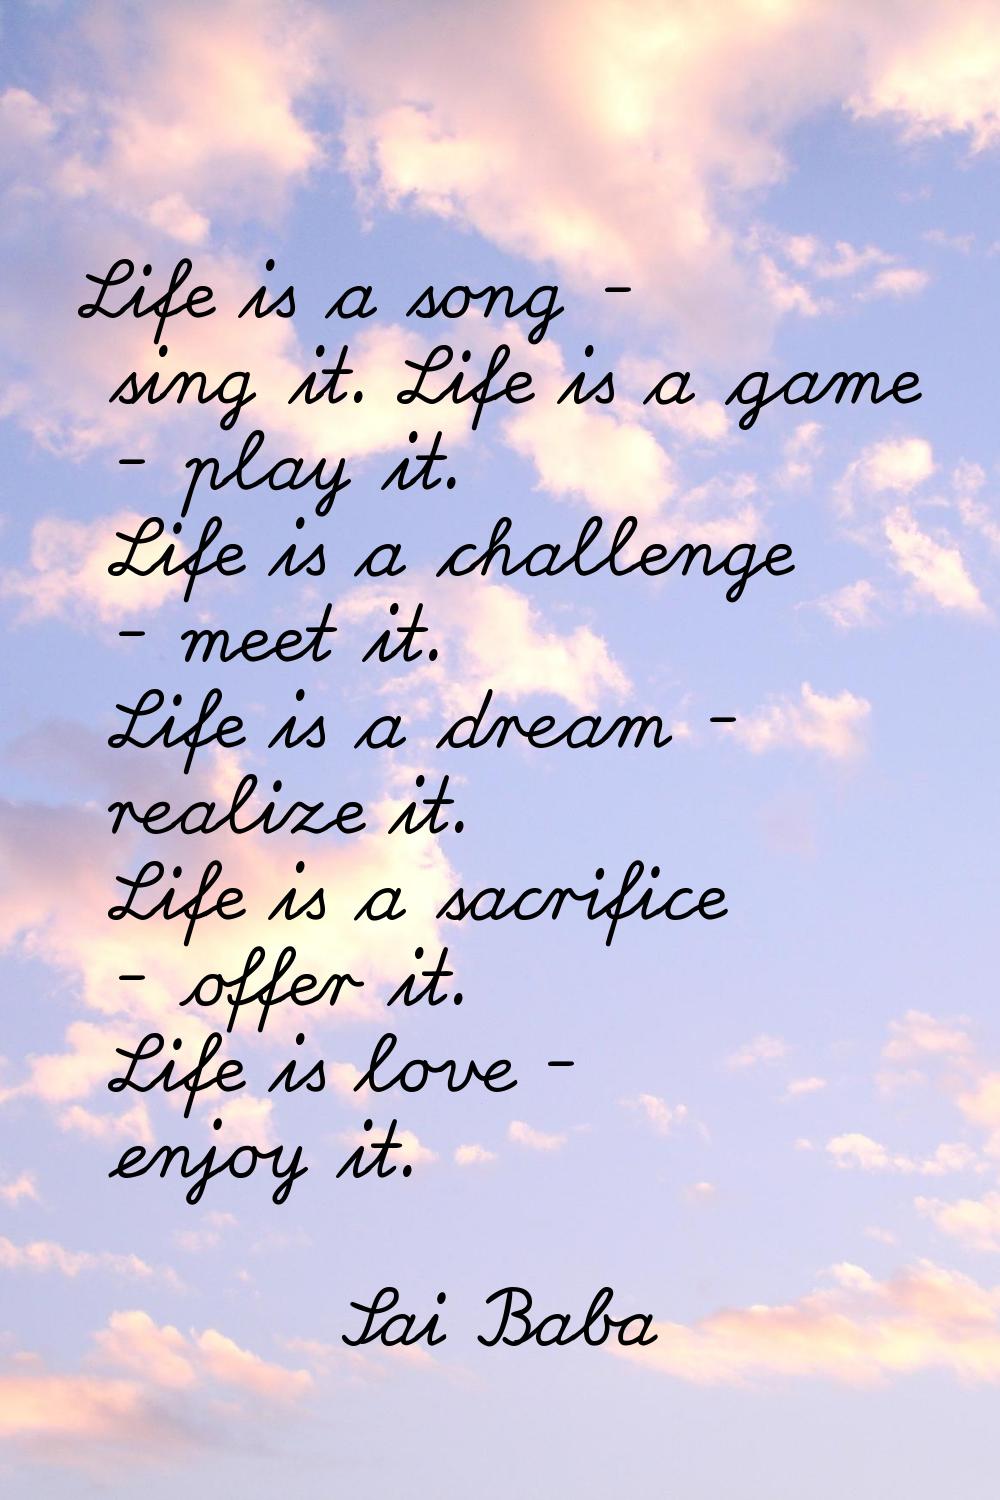 Life is a song - sing it. Life is a game - play it. Life is a challenge - meet it. Life is a dream 